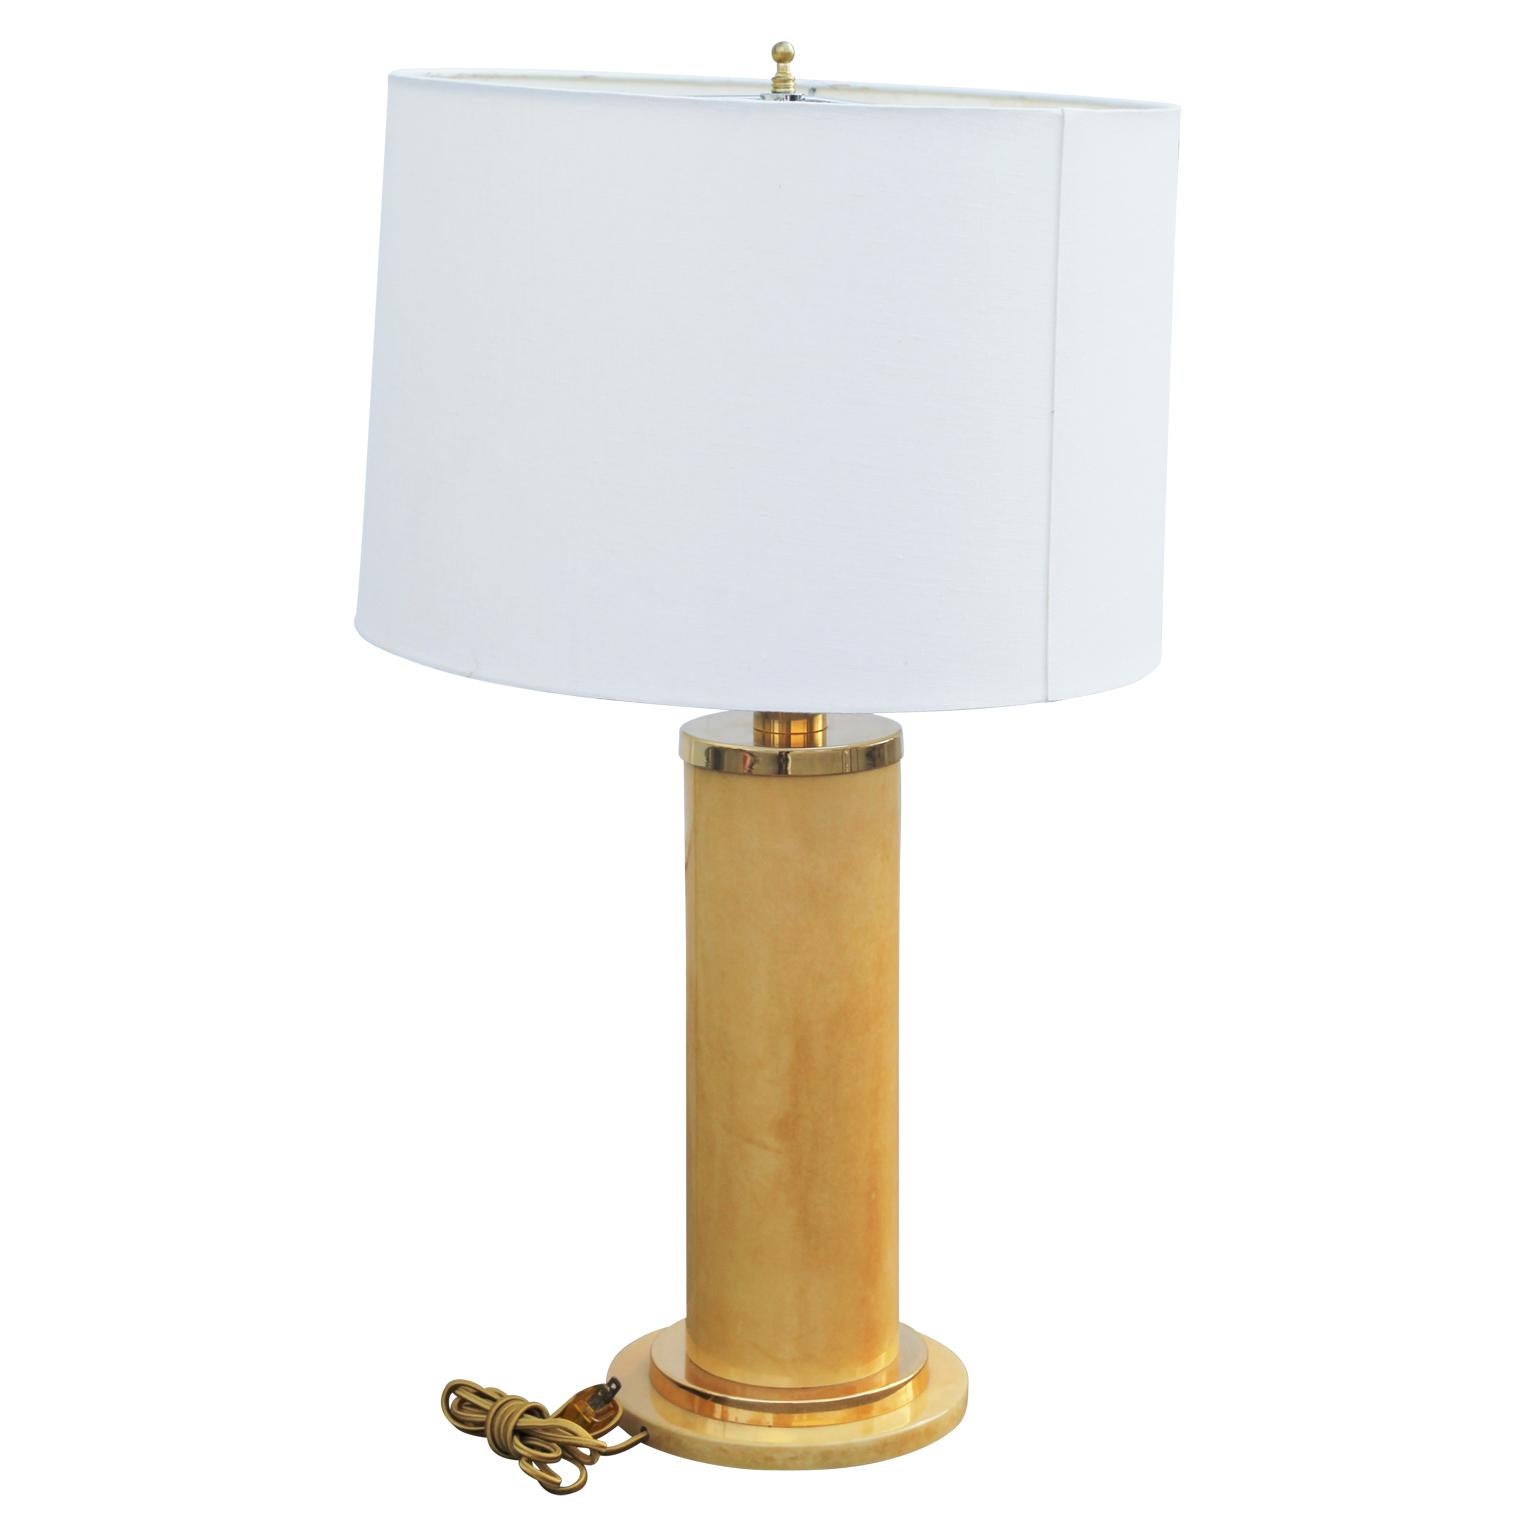 1980s goatskin table lamp in the style of Aldo Tura. Comes with the white shade displayed in the photo.